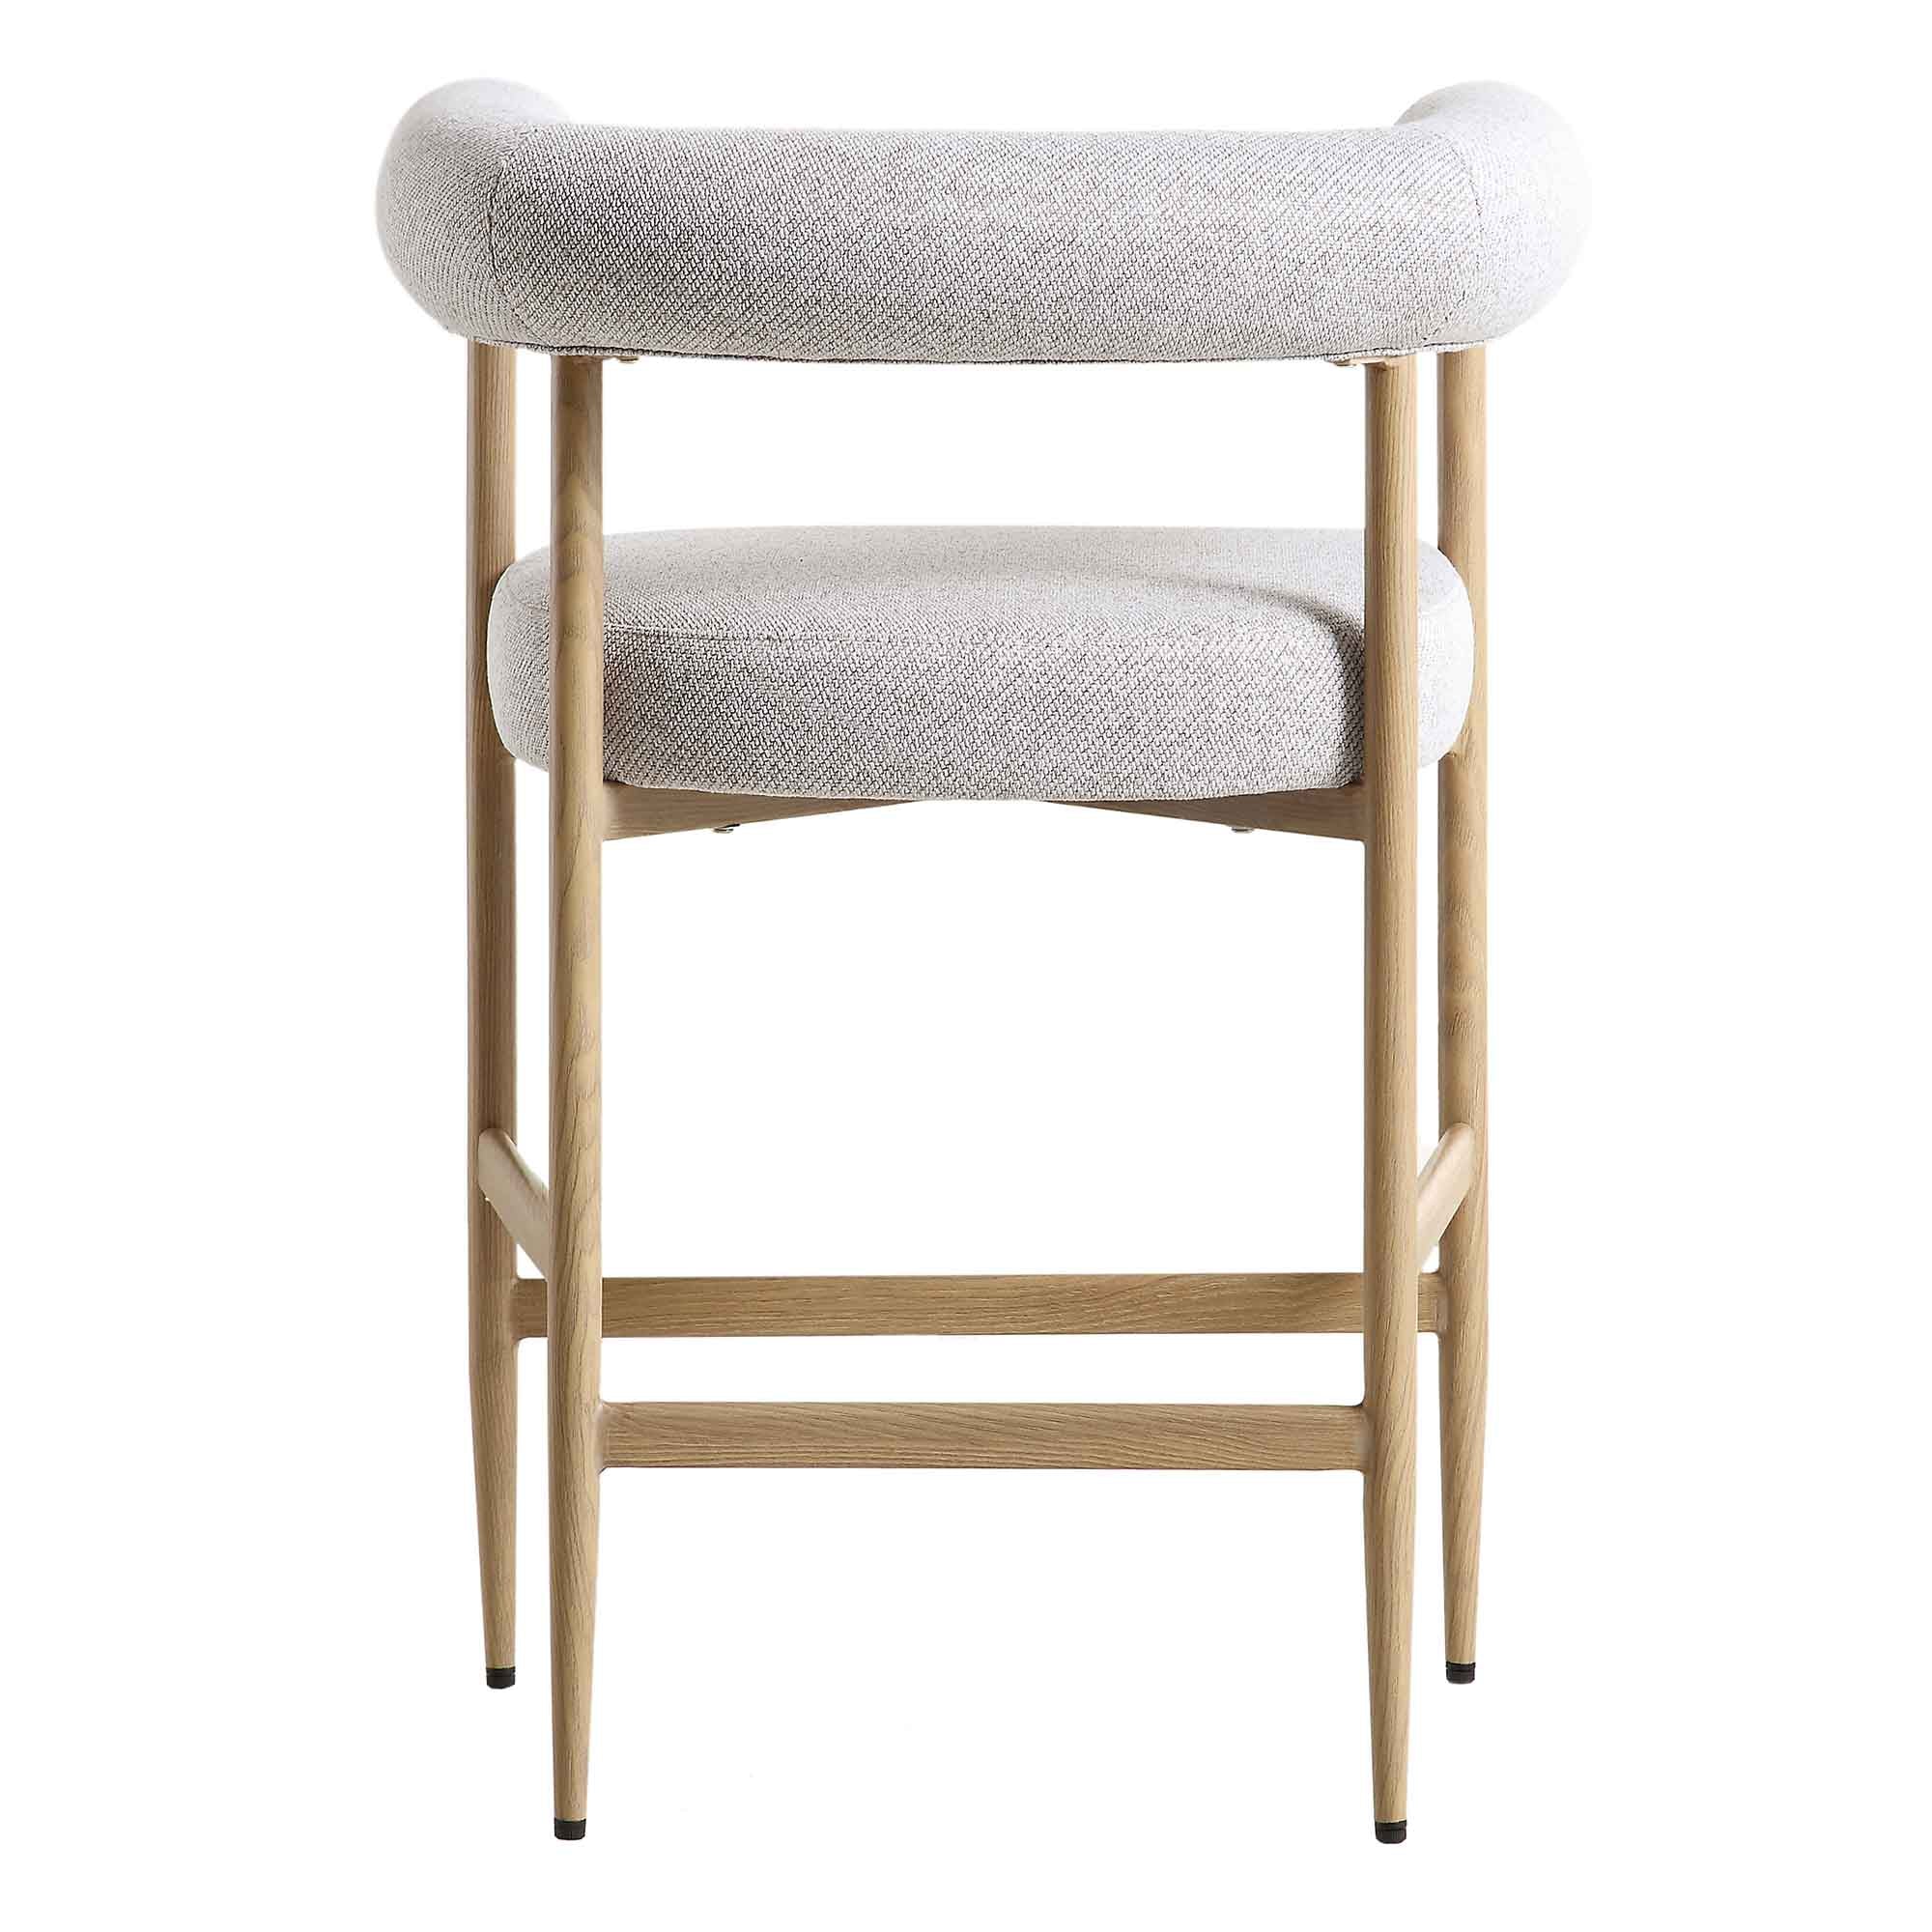 Fulbourn Beige Woven Counter Stool with Natural Wood Effect Legs